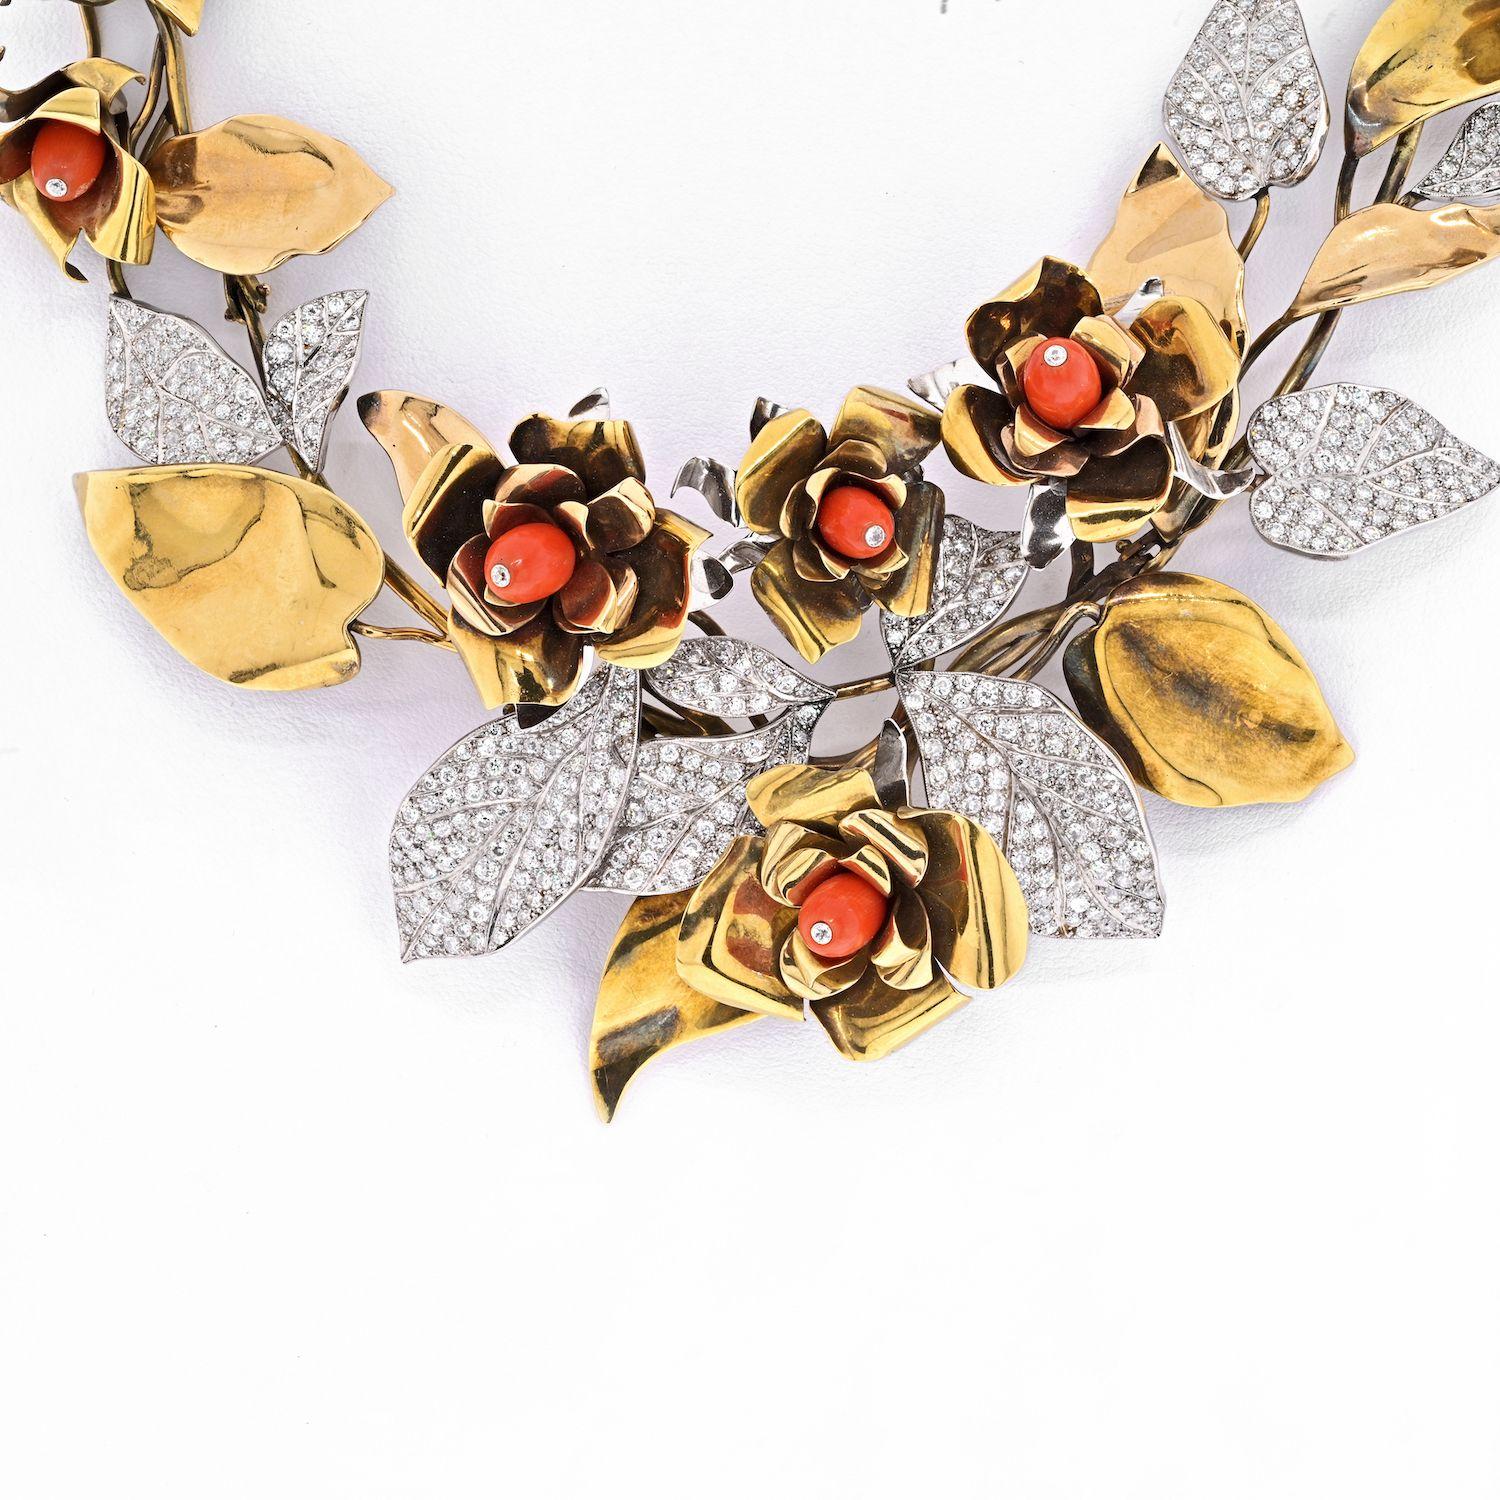 This large necklace is decorated with diamond and high polished rose gold leaves, and features natural coral accents all throughout. Your dress can be made more elegant with this necklace reminiscent of the ornate jewelry of the 1930s. This